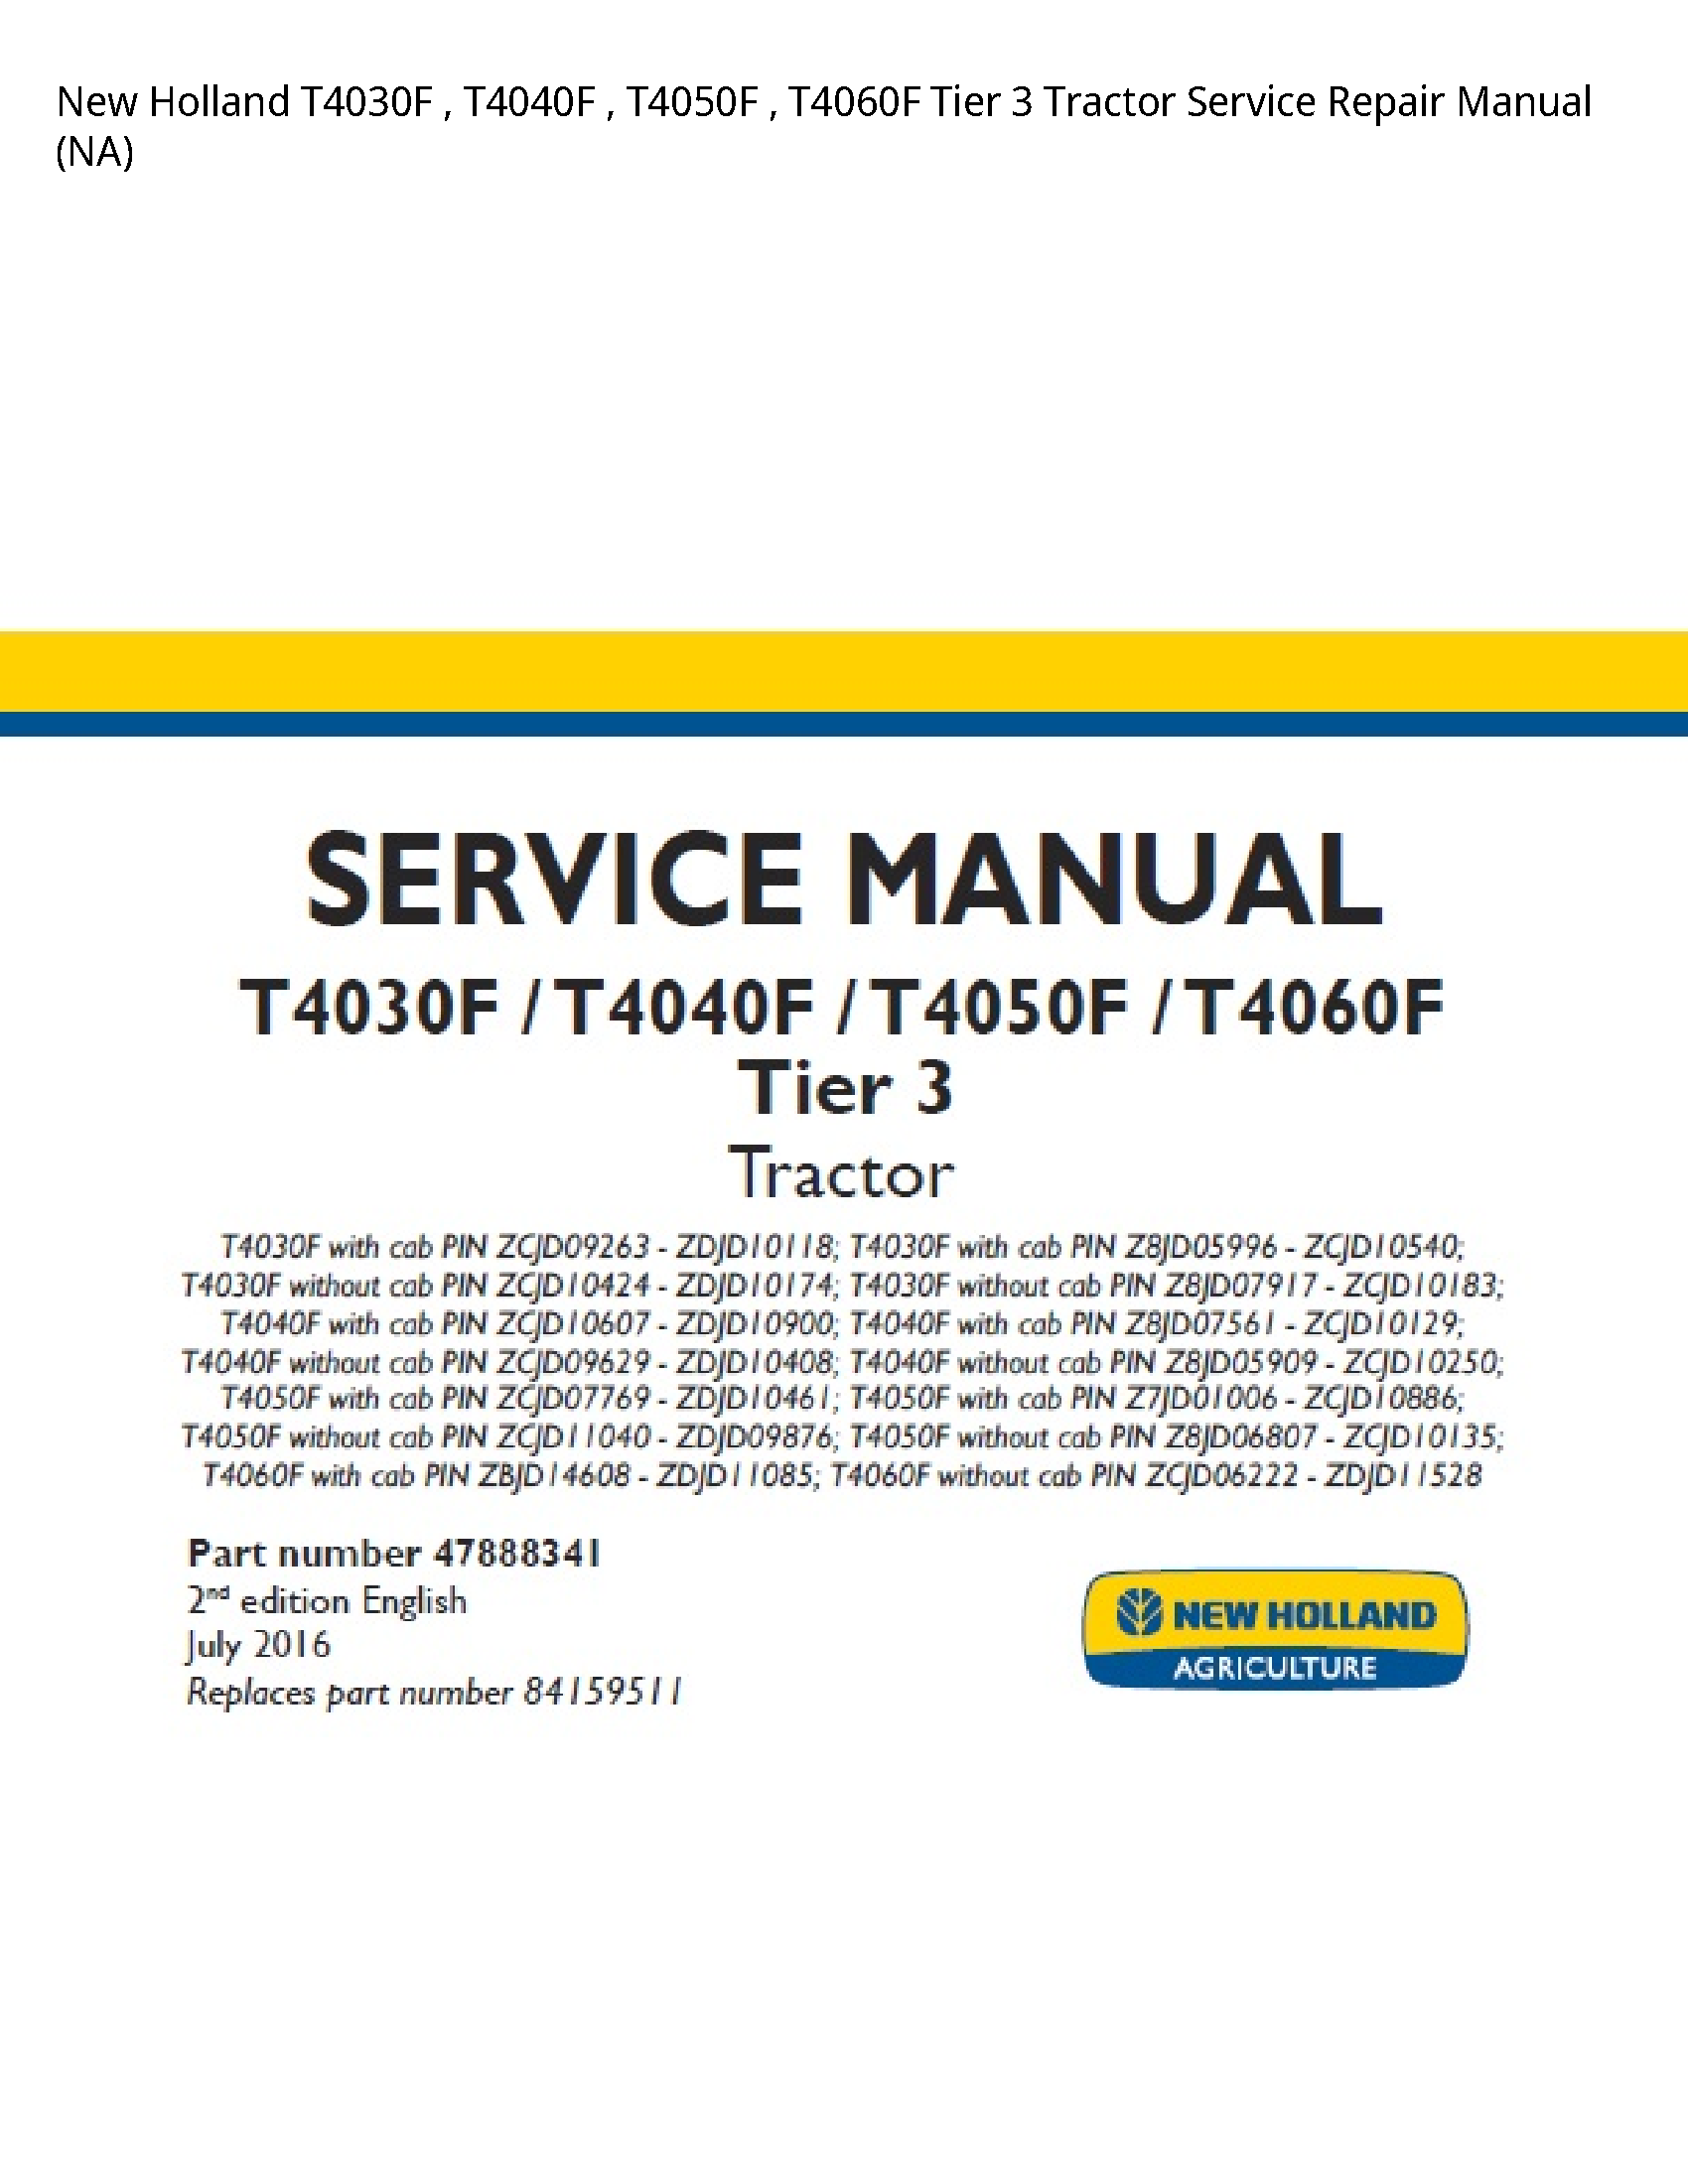 New Holland T4030F Tier Tractor manual